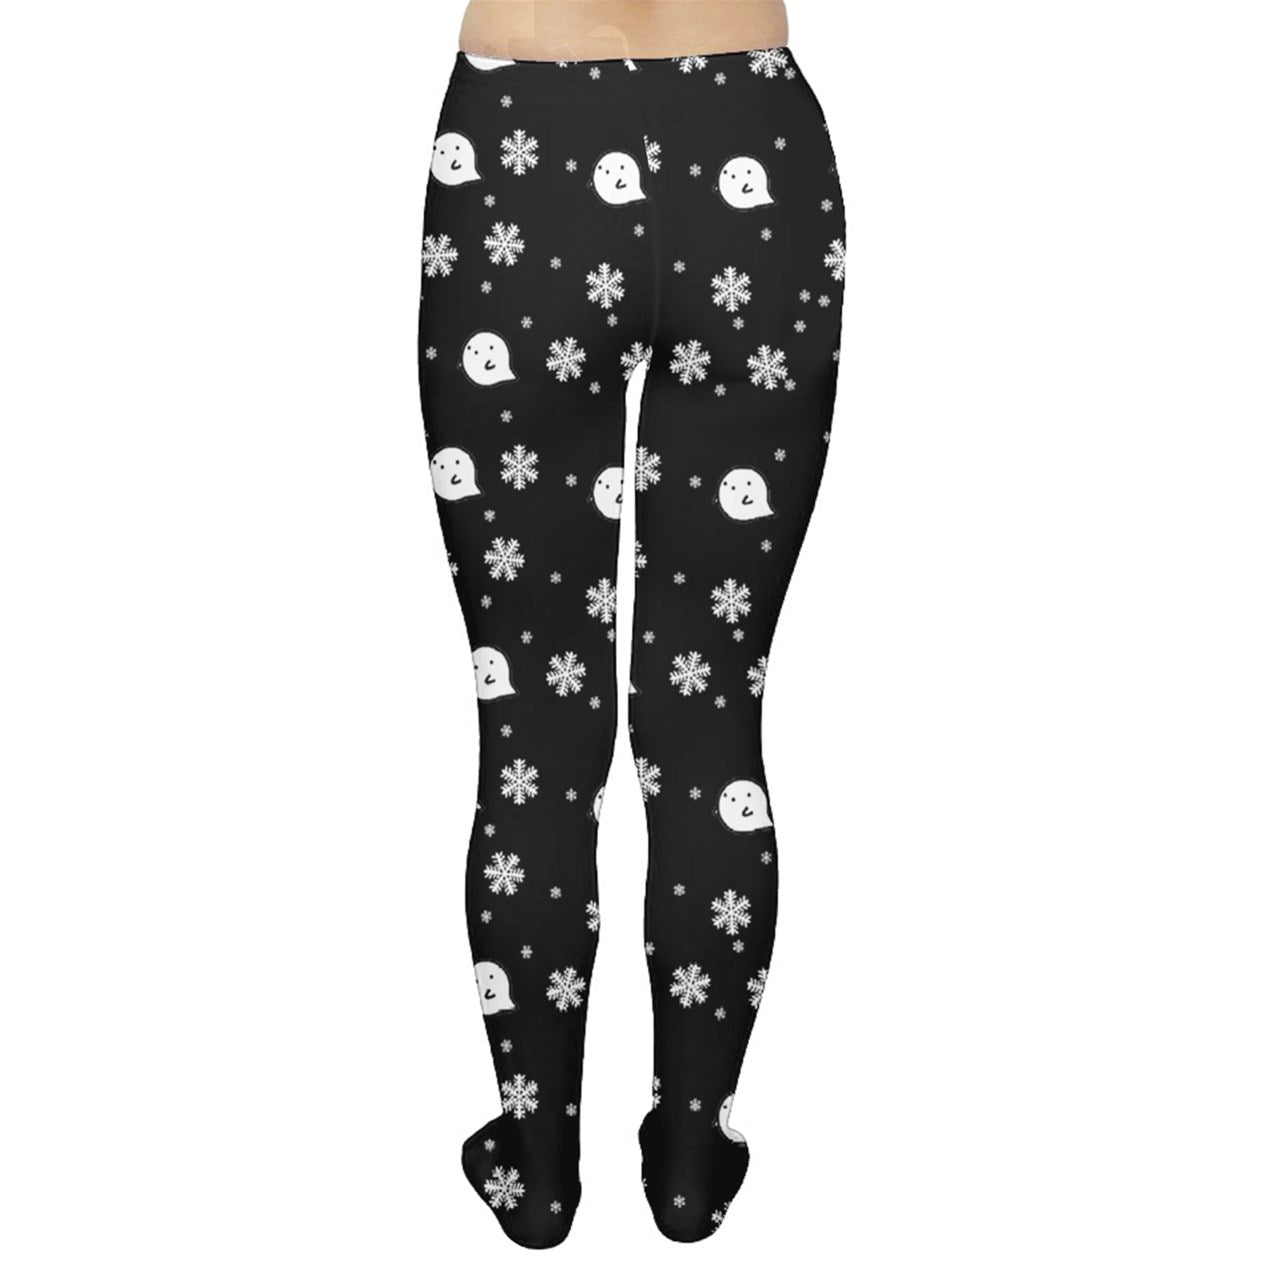 Spooky Snowflake Tights